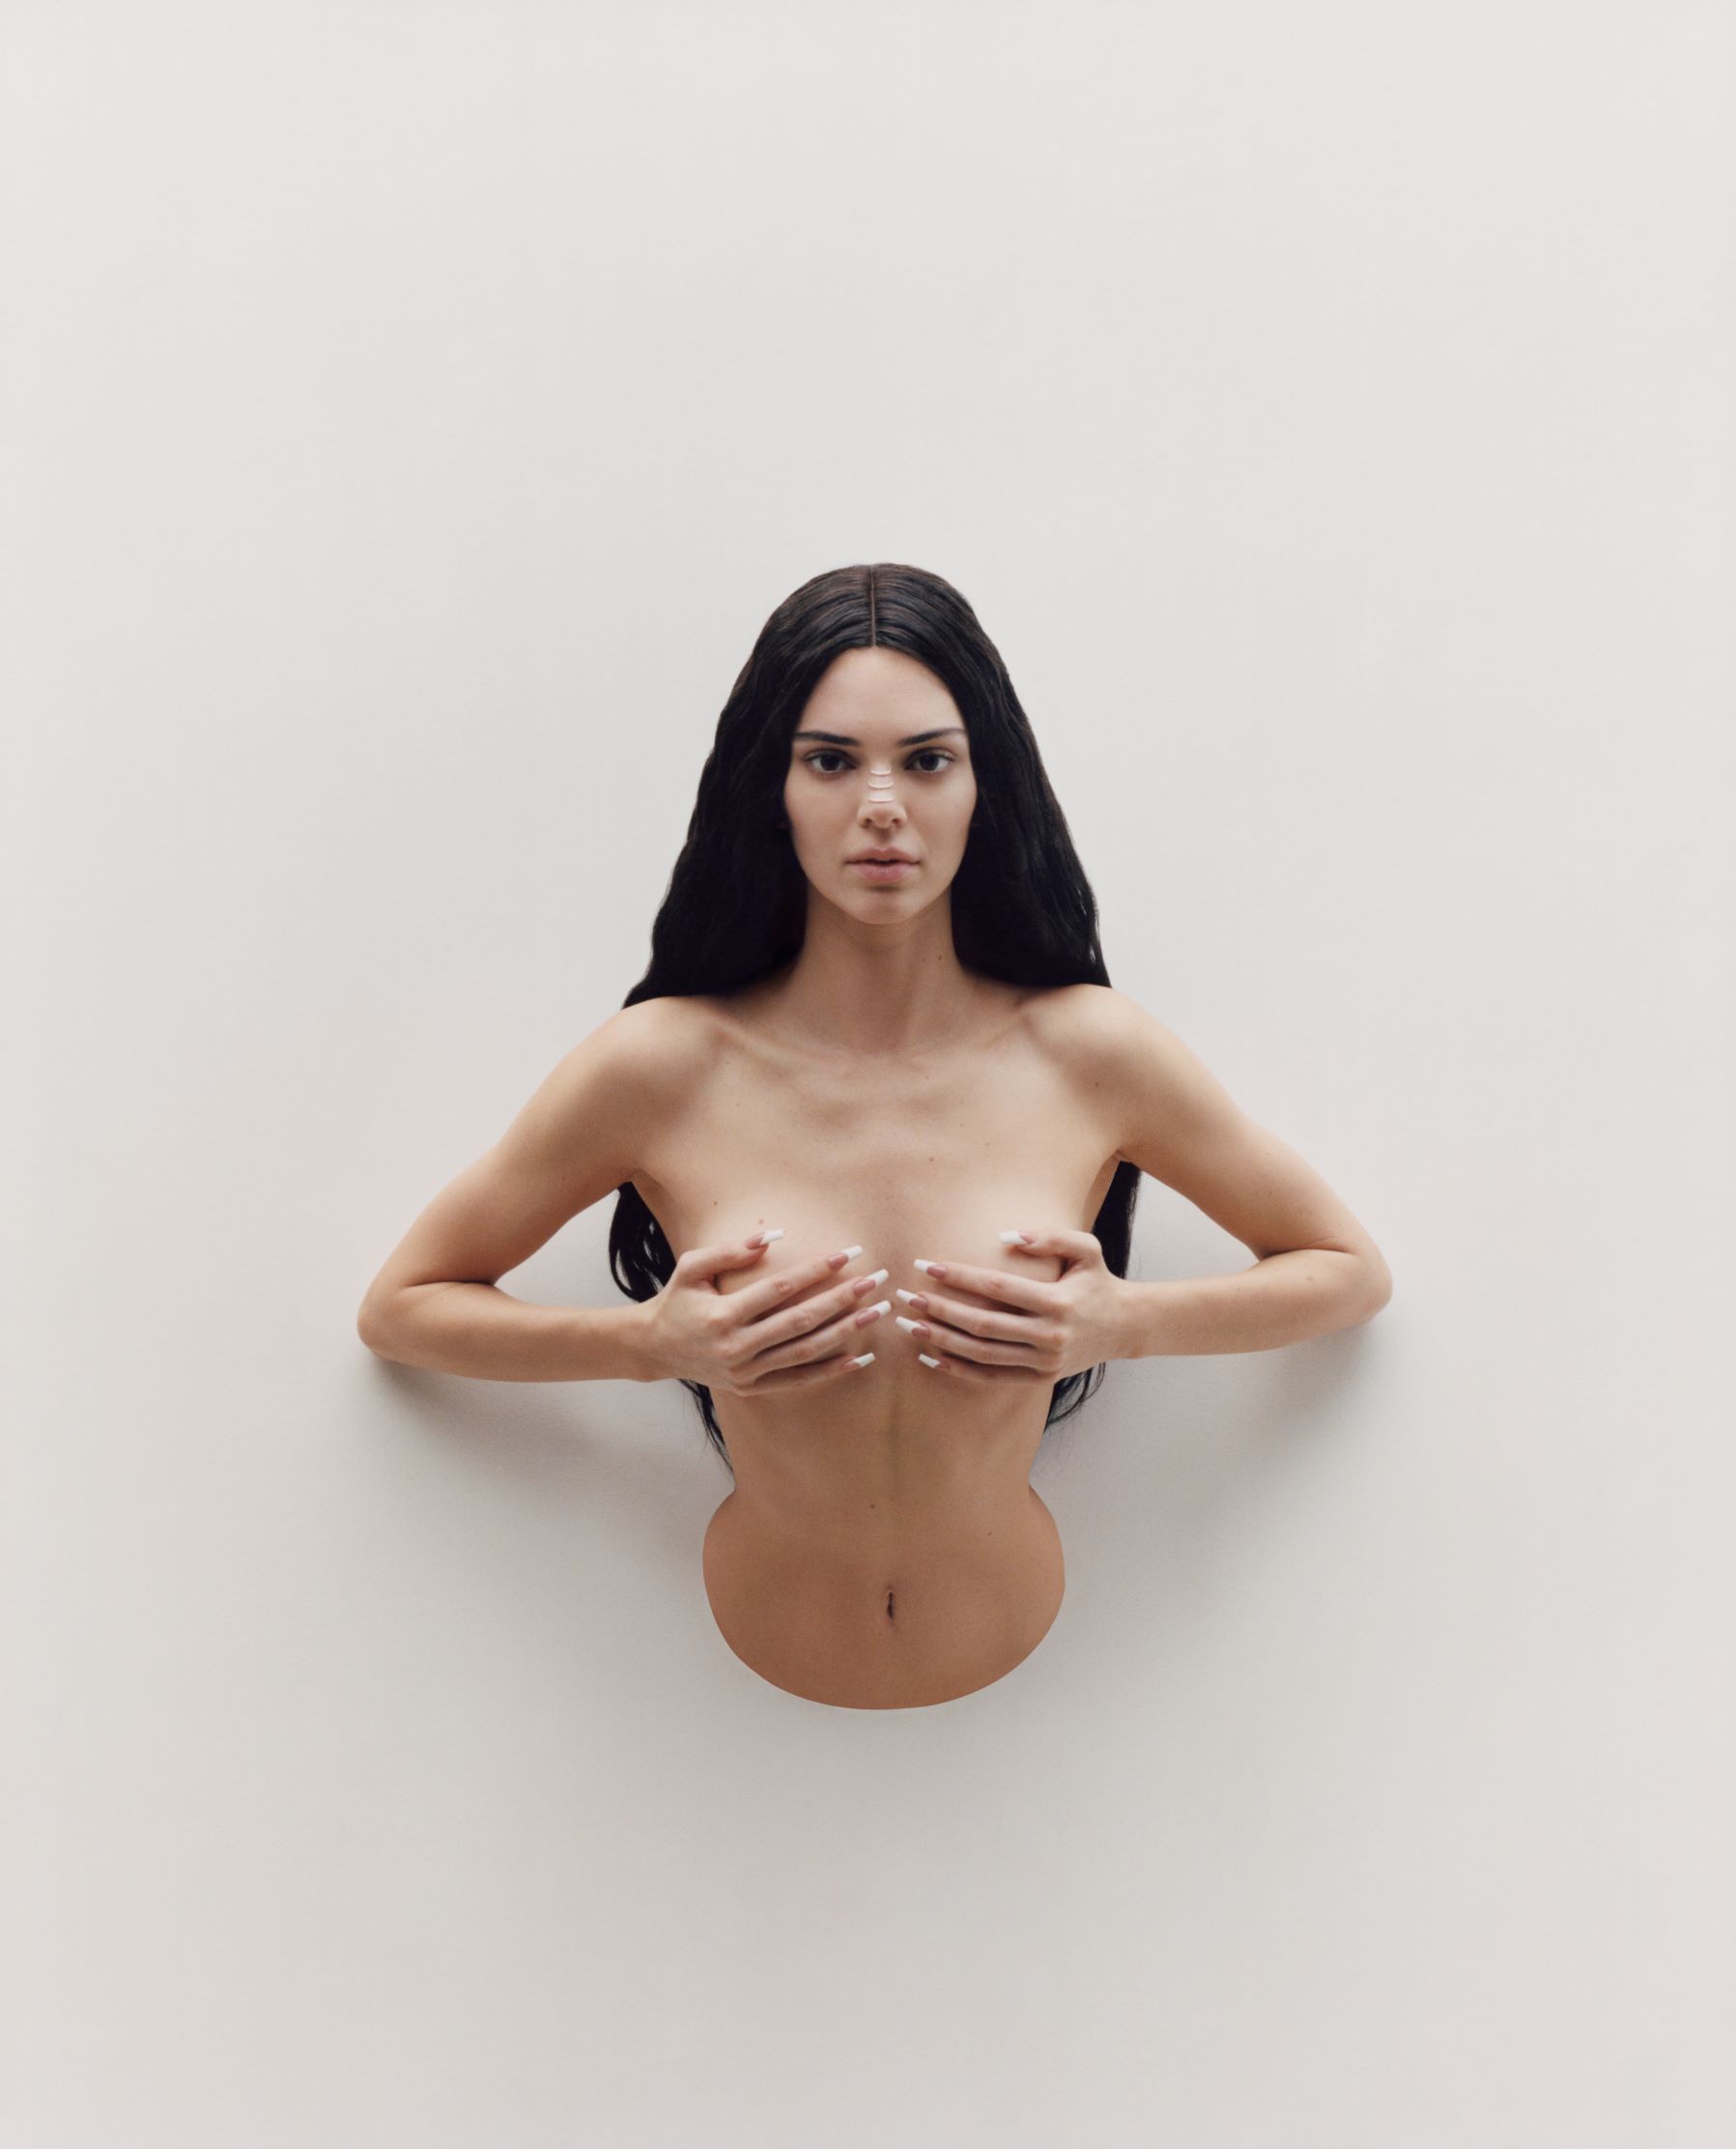 Kendall jenner poses totally topless